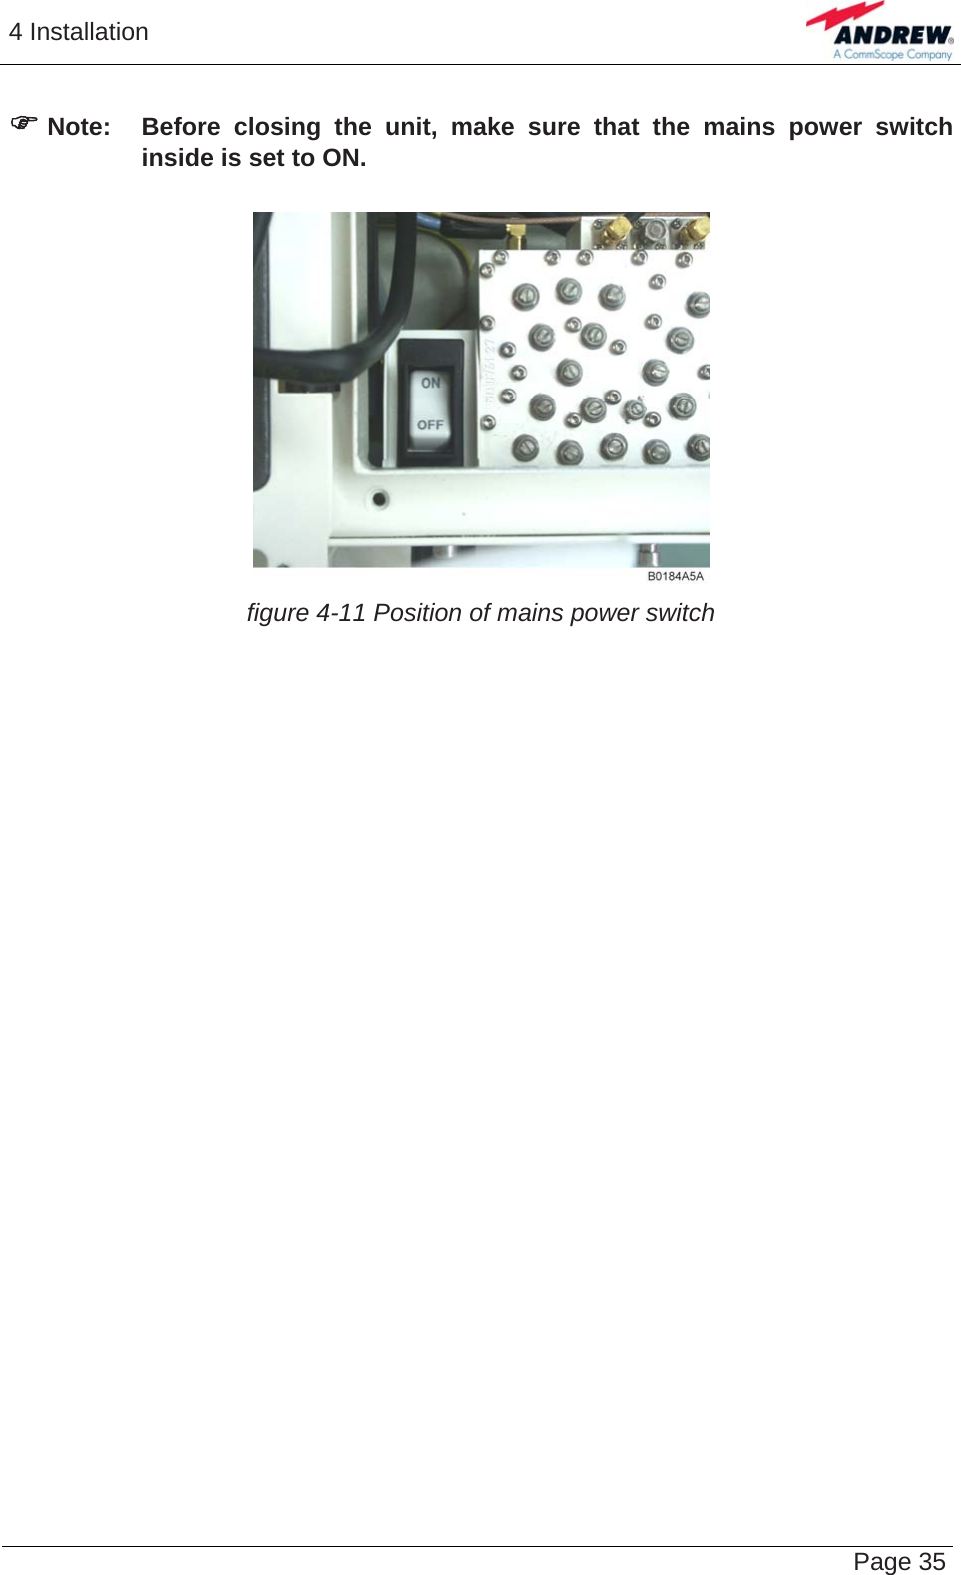 4 Installation   Page 35) Note:  Before closing the unit, make sure that the mains power switch inside is set to ON.    figure 4-11 Position of mains power switch    